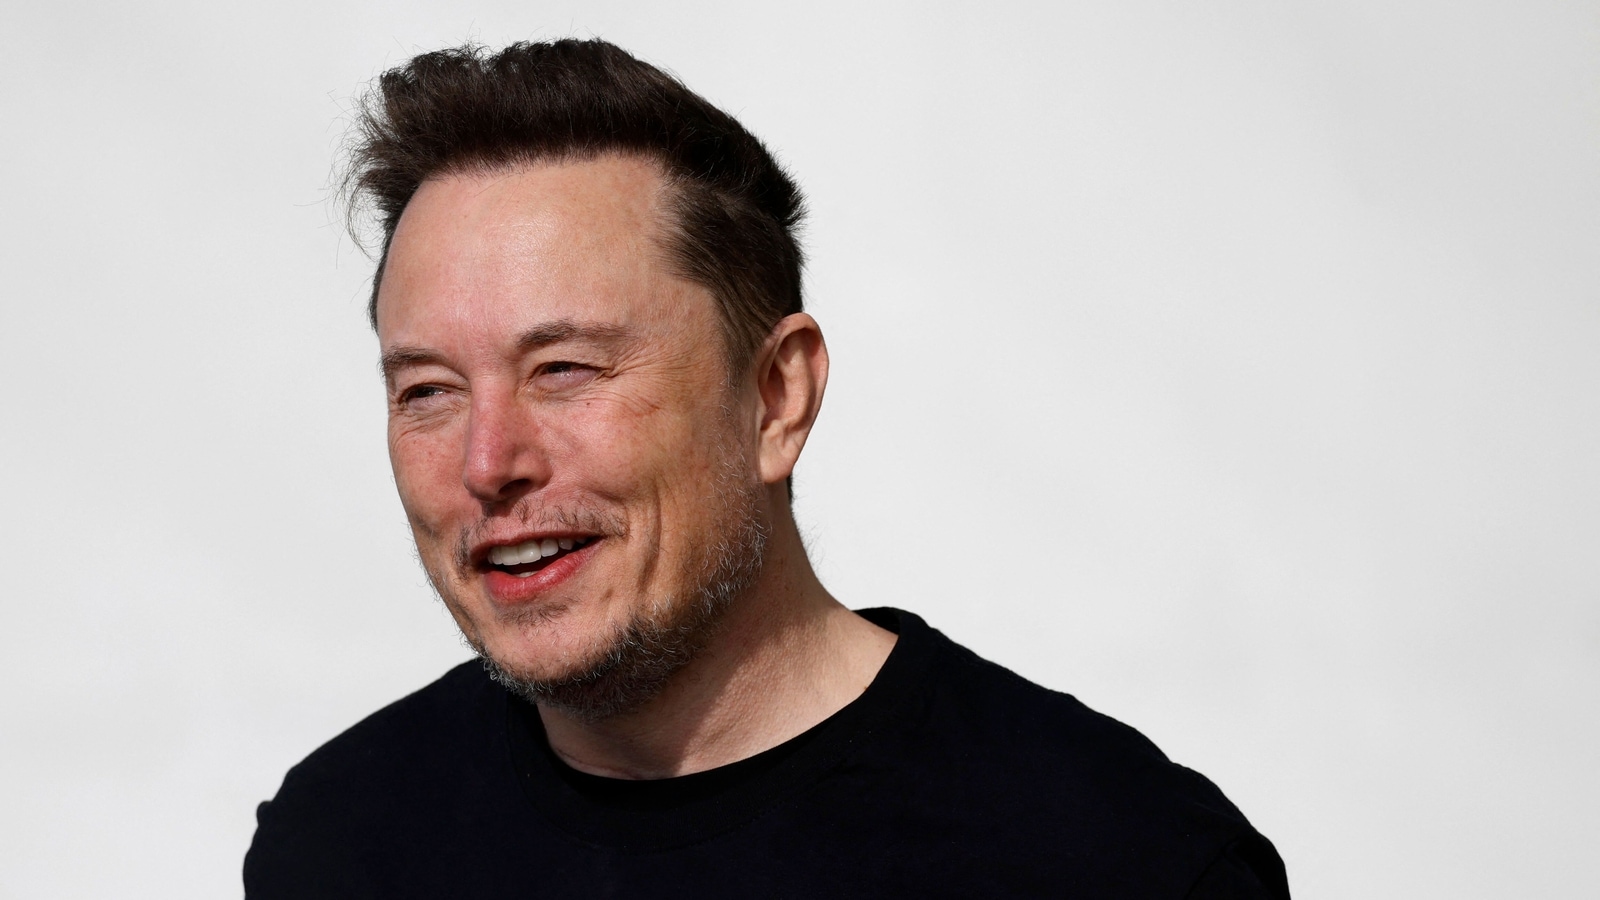 Elon Musk’s trip to India: Starlink approvals, Tesla factories and further on agenda